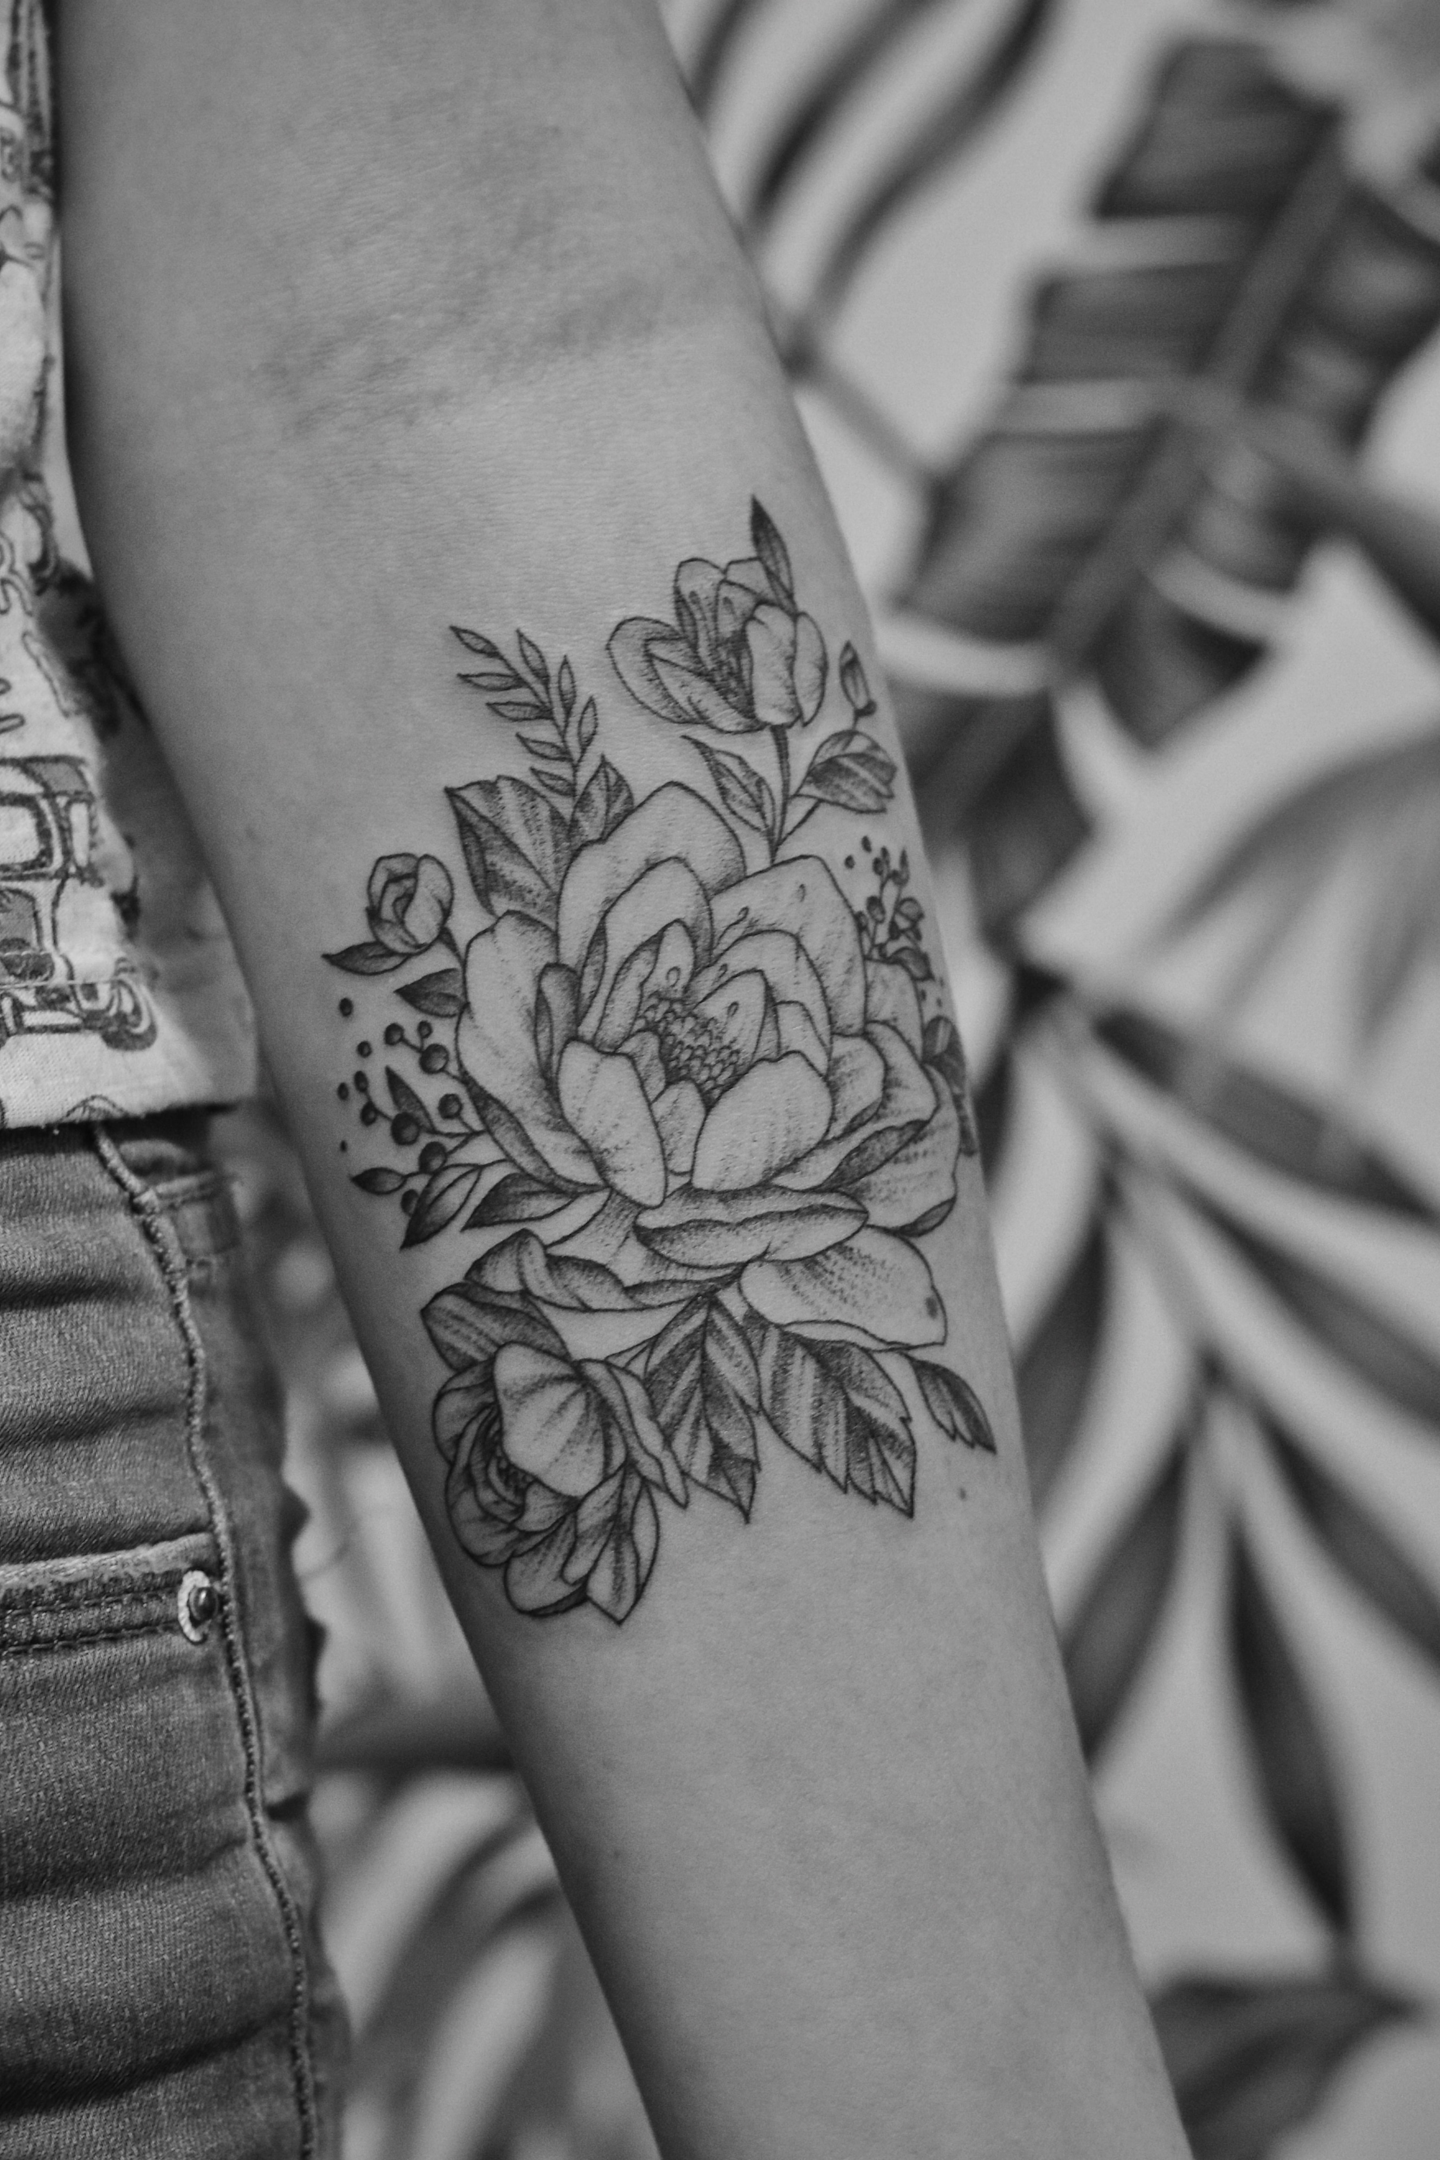 Get tattooed in Lisbon, Portugal from a top shop